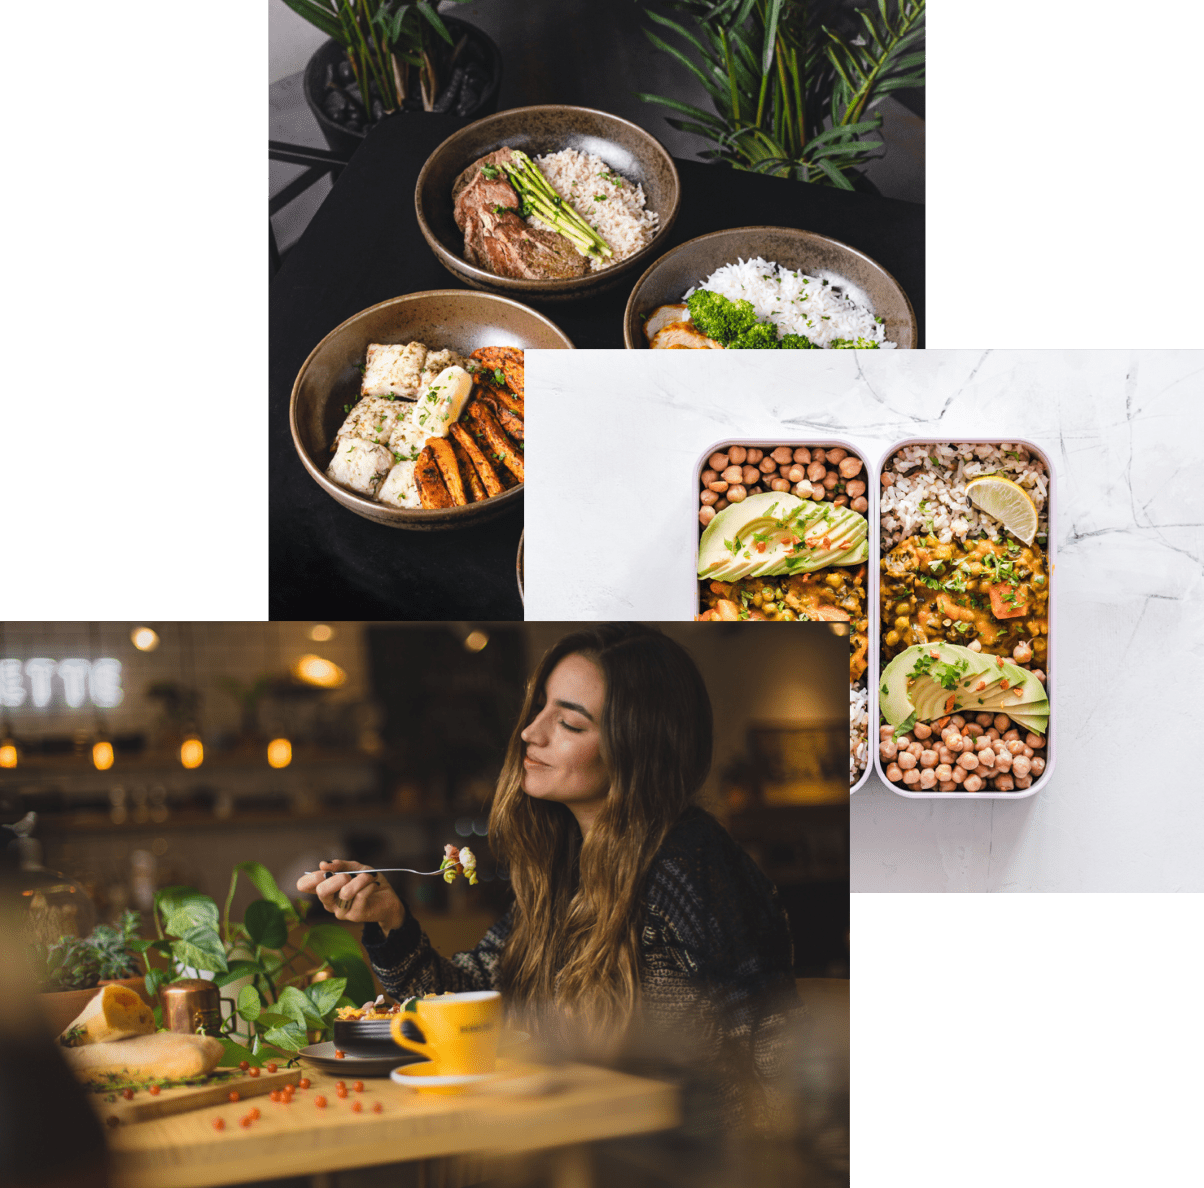 an image composited of 3 images, first and second image are nicely decorated meal placed in bowls and containers, and third image is a woman enjoying her food.